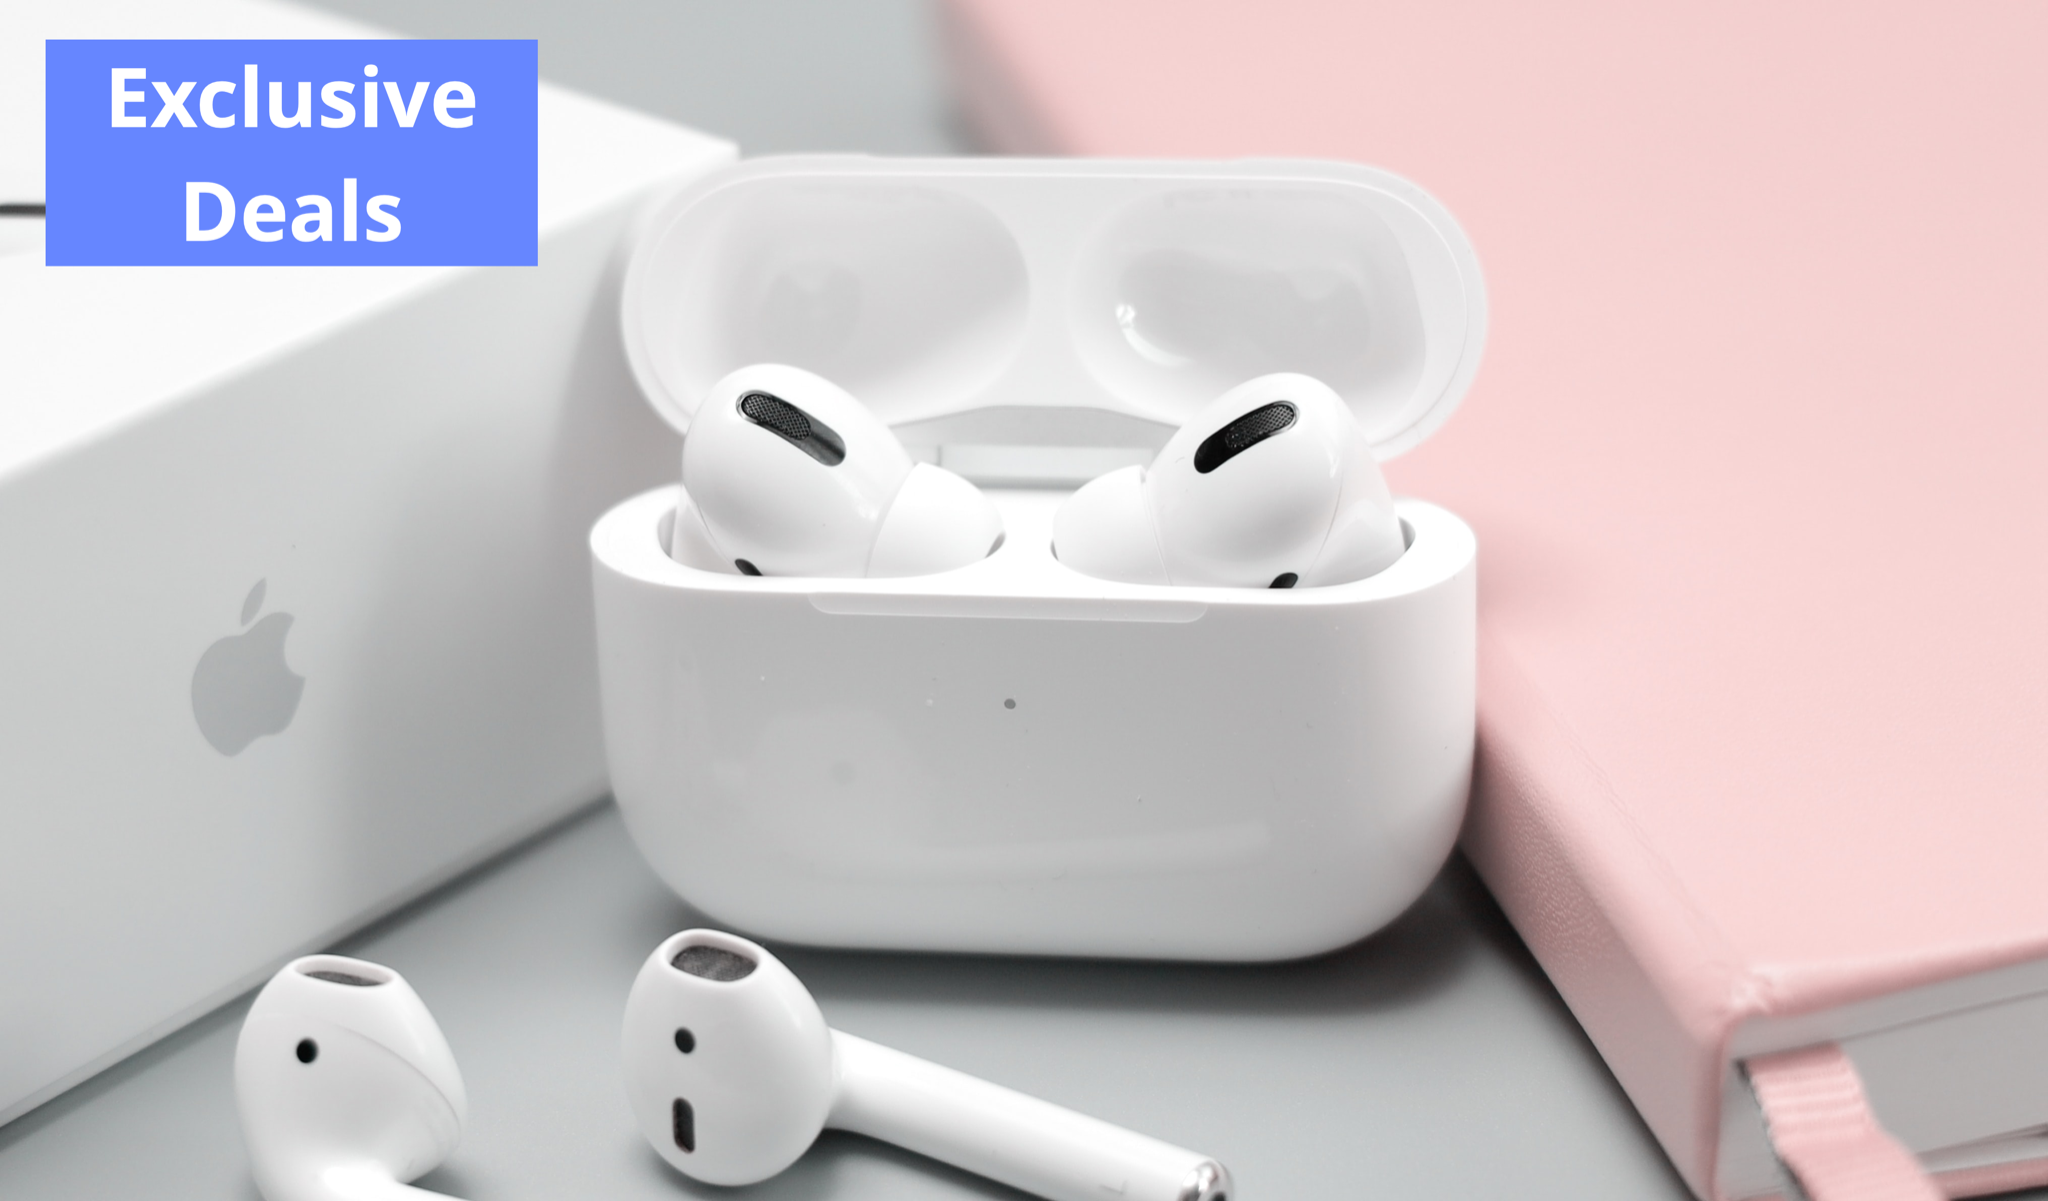 get_the_best_Apple Airpods_ad